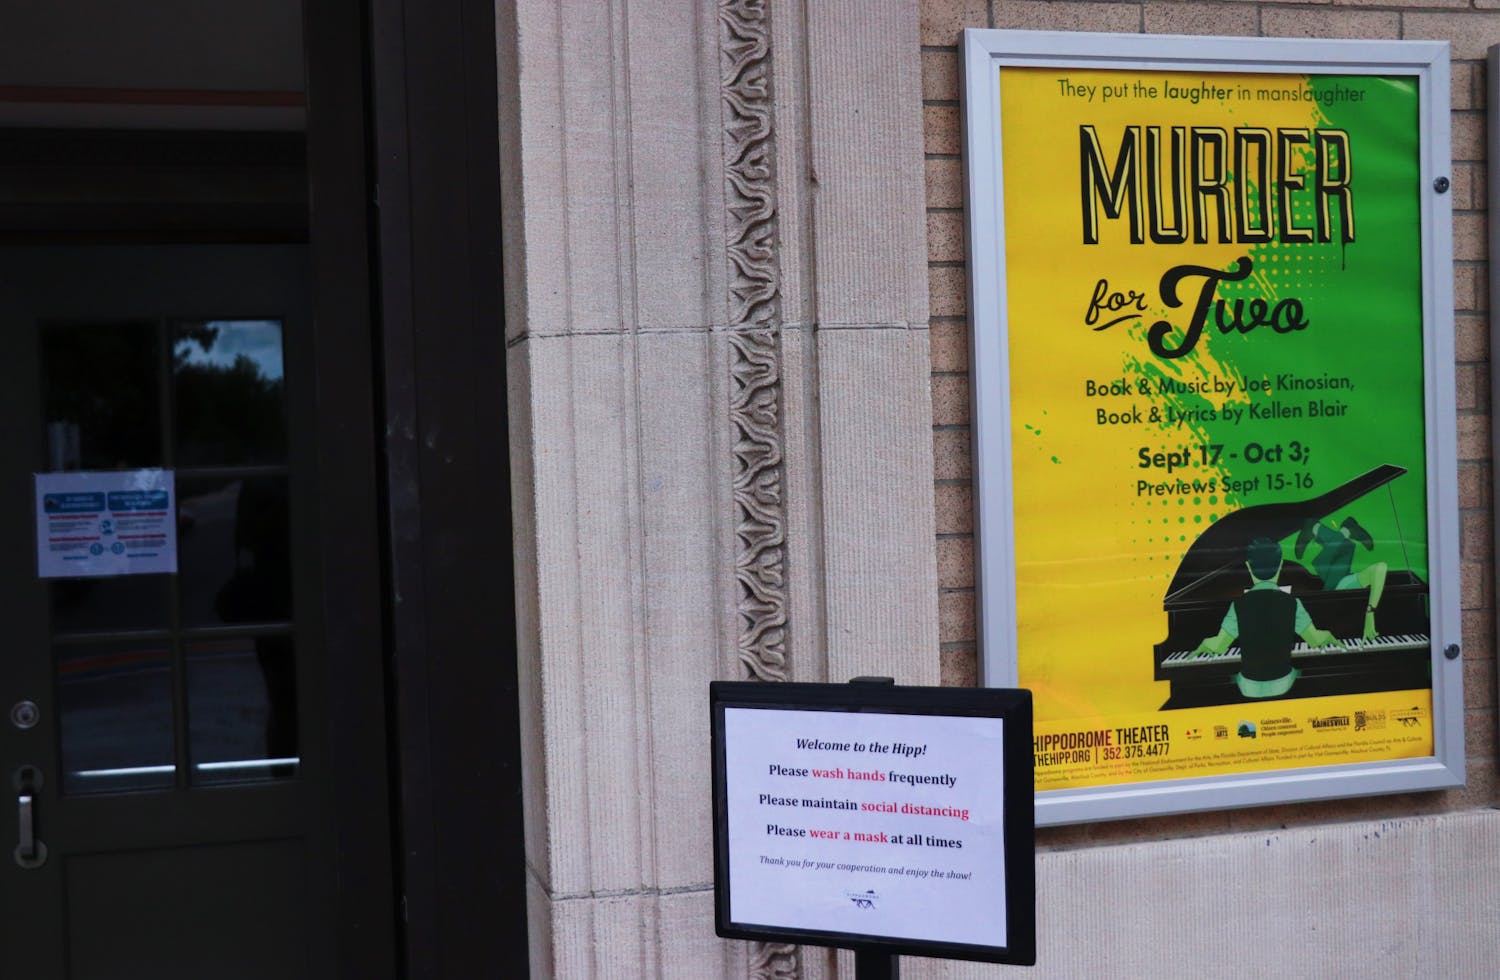 The Hippodrome Theatre, located at 25 SE 2nd Place, will open its doors on Friday, Sept. 17, 2021 for “Murder For Two,” one of the first in-person performances since the beginning of the COVID-19 pandemic.